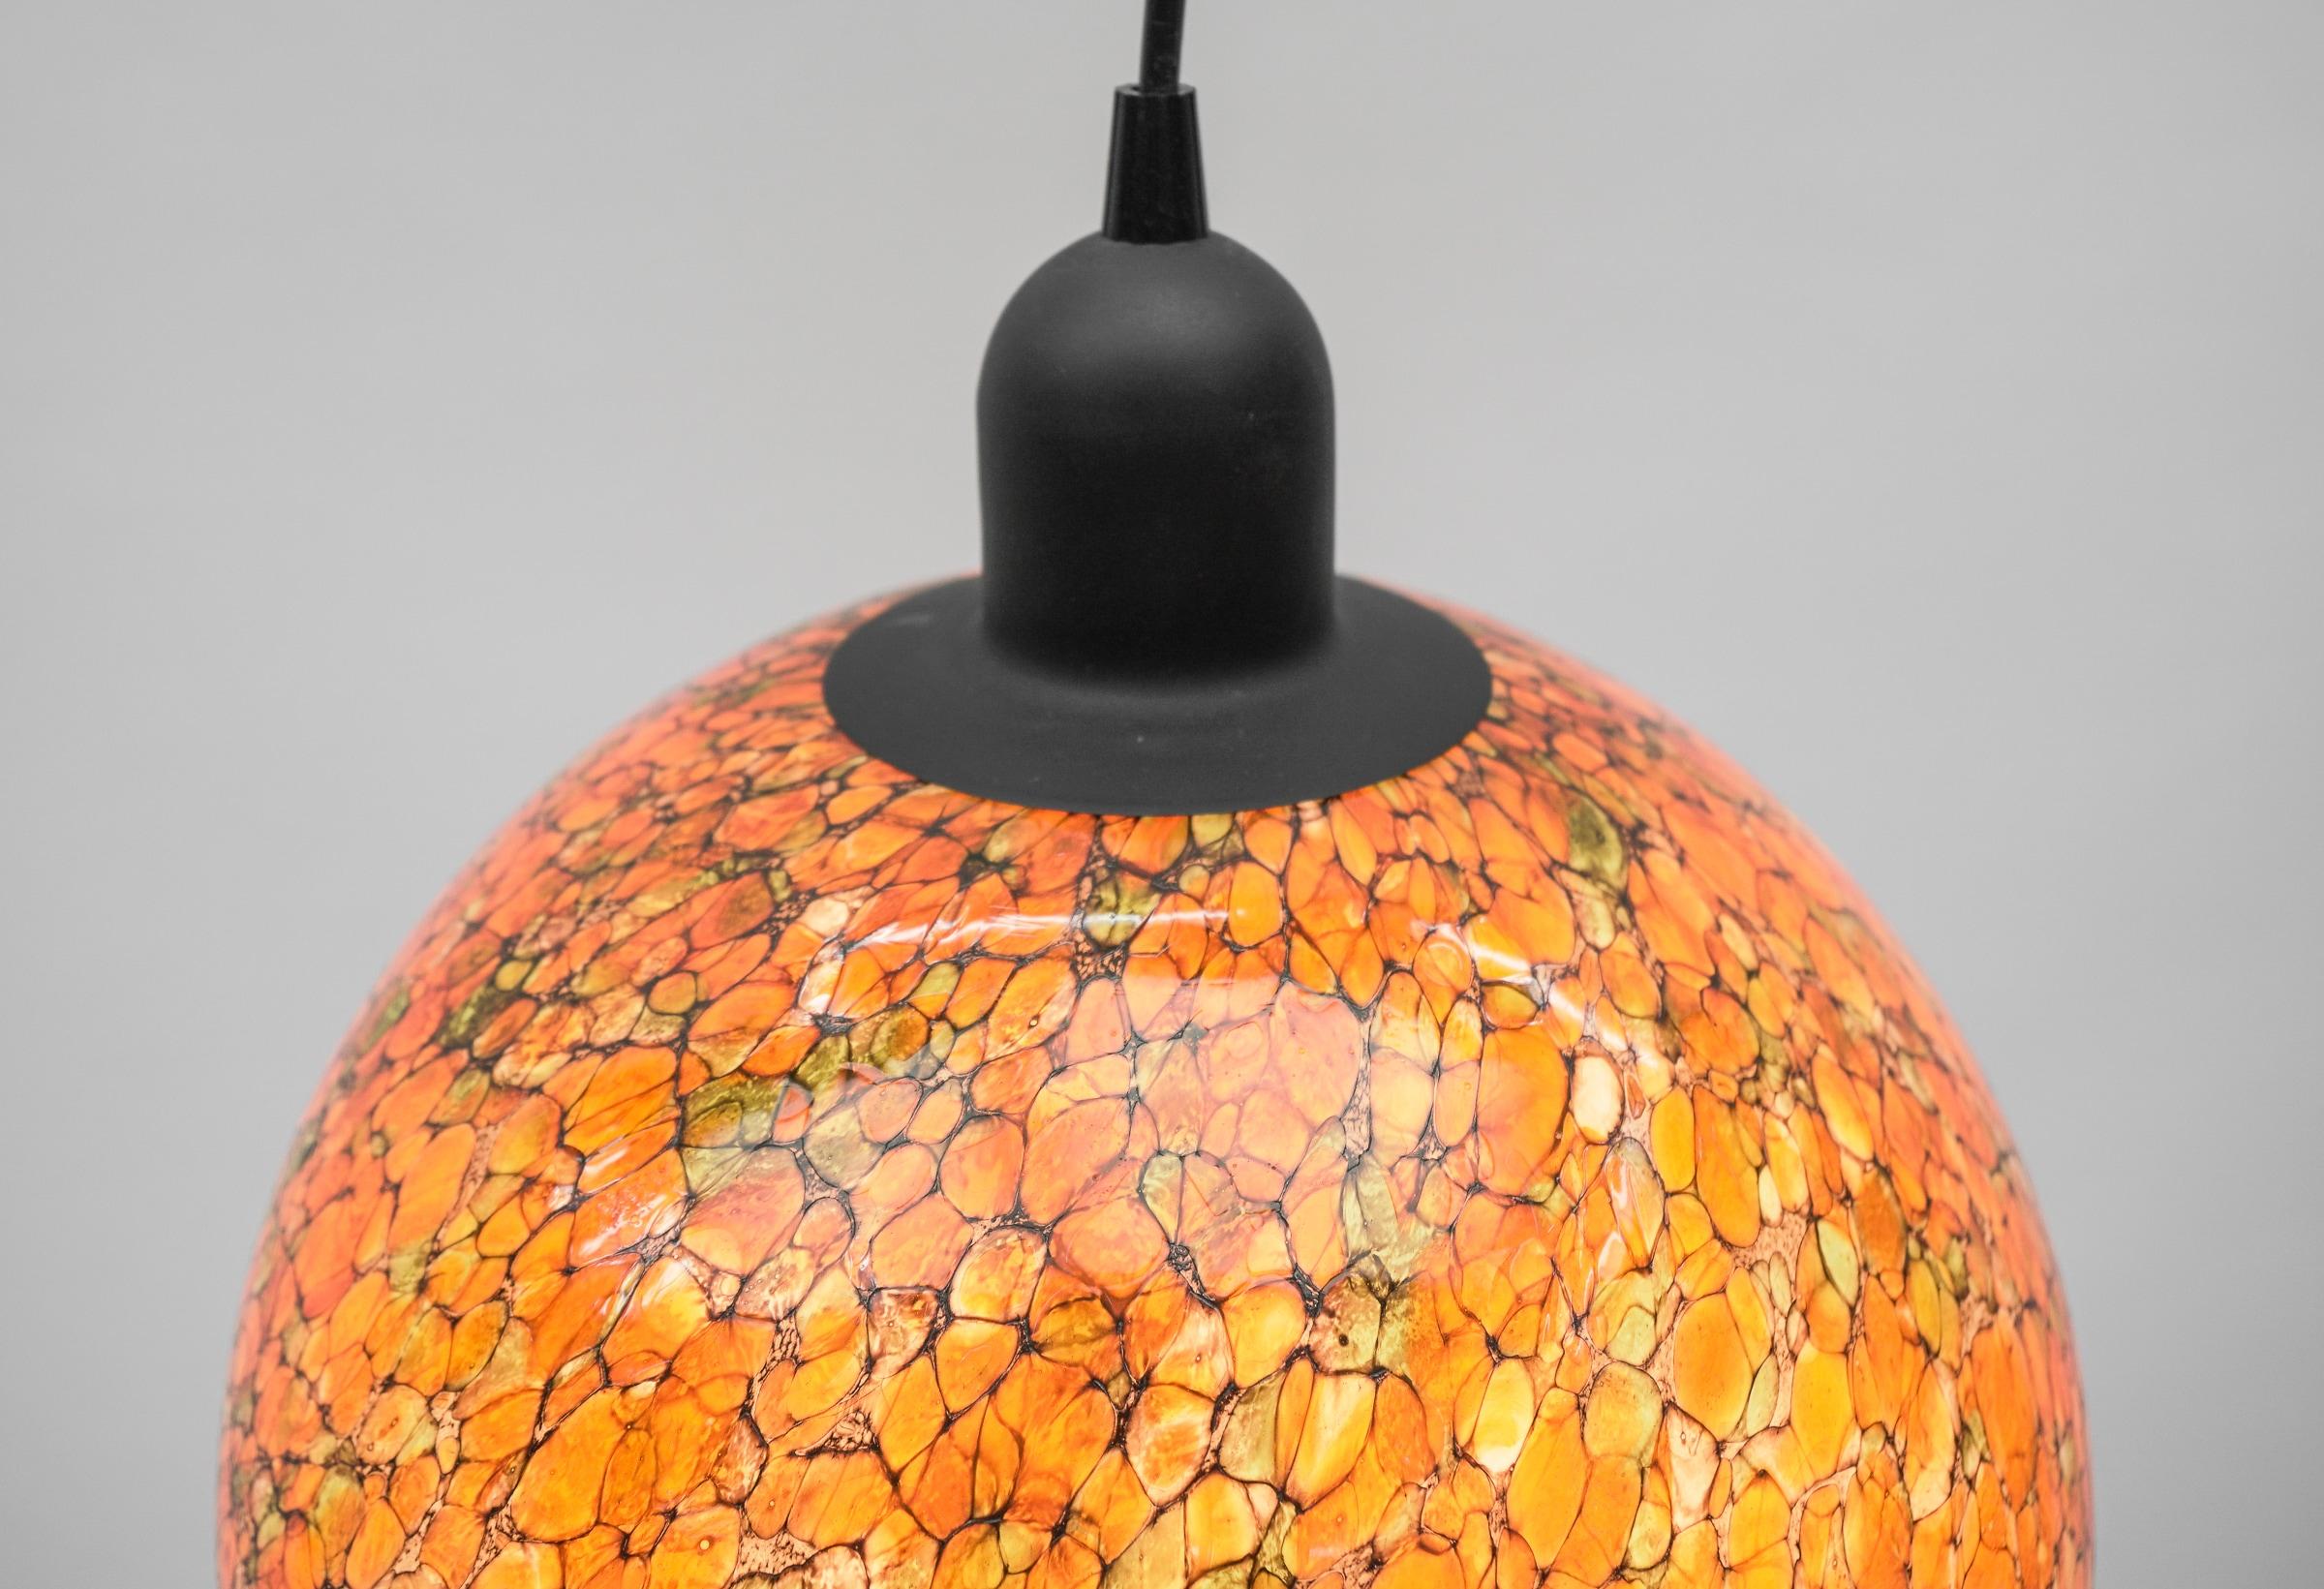 Exceptional Mid-Century Modern Pendant Lamp by Peill & Putzler, 1970s, Germany For Sale 1